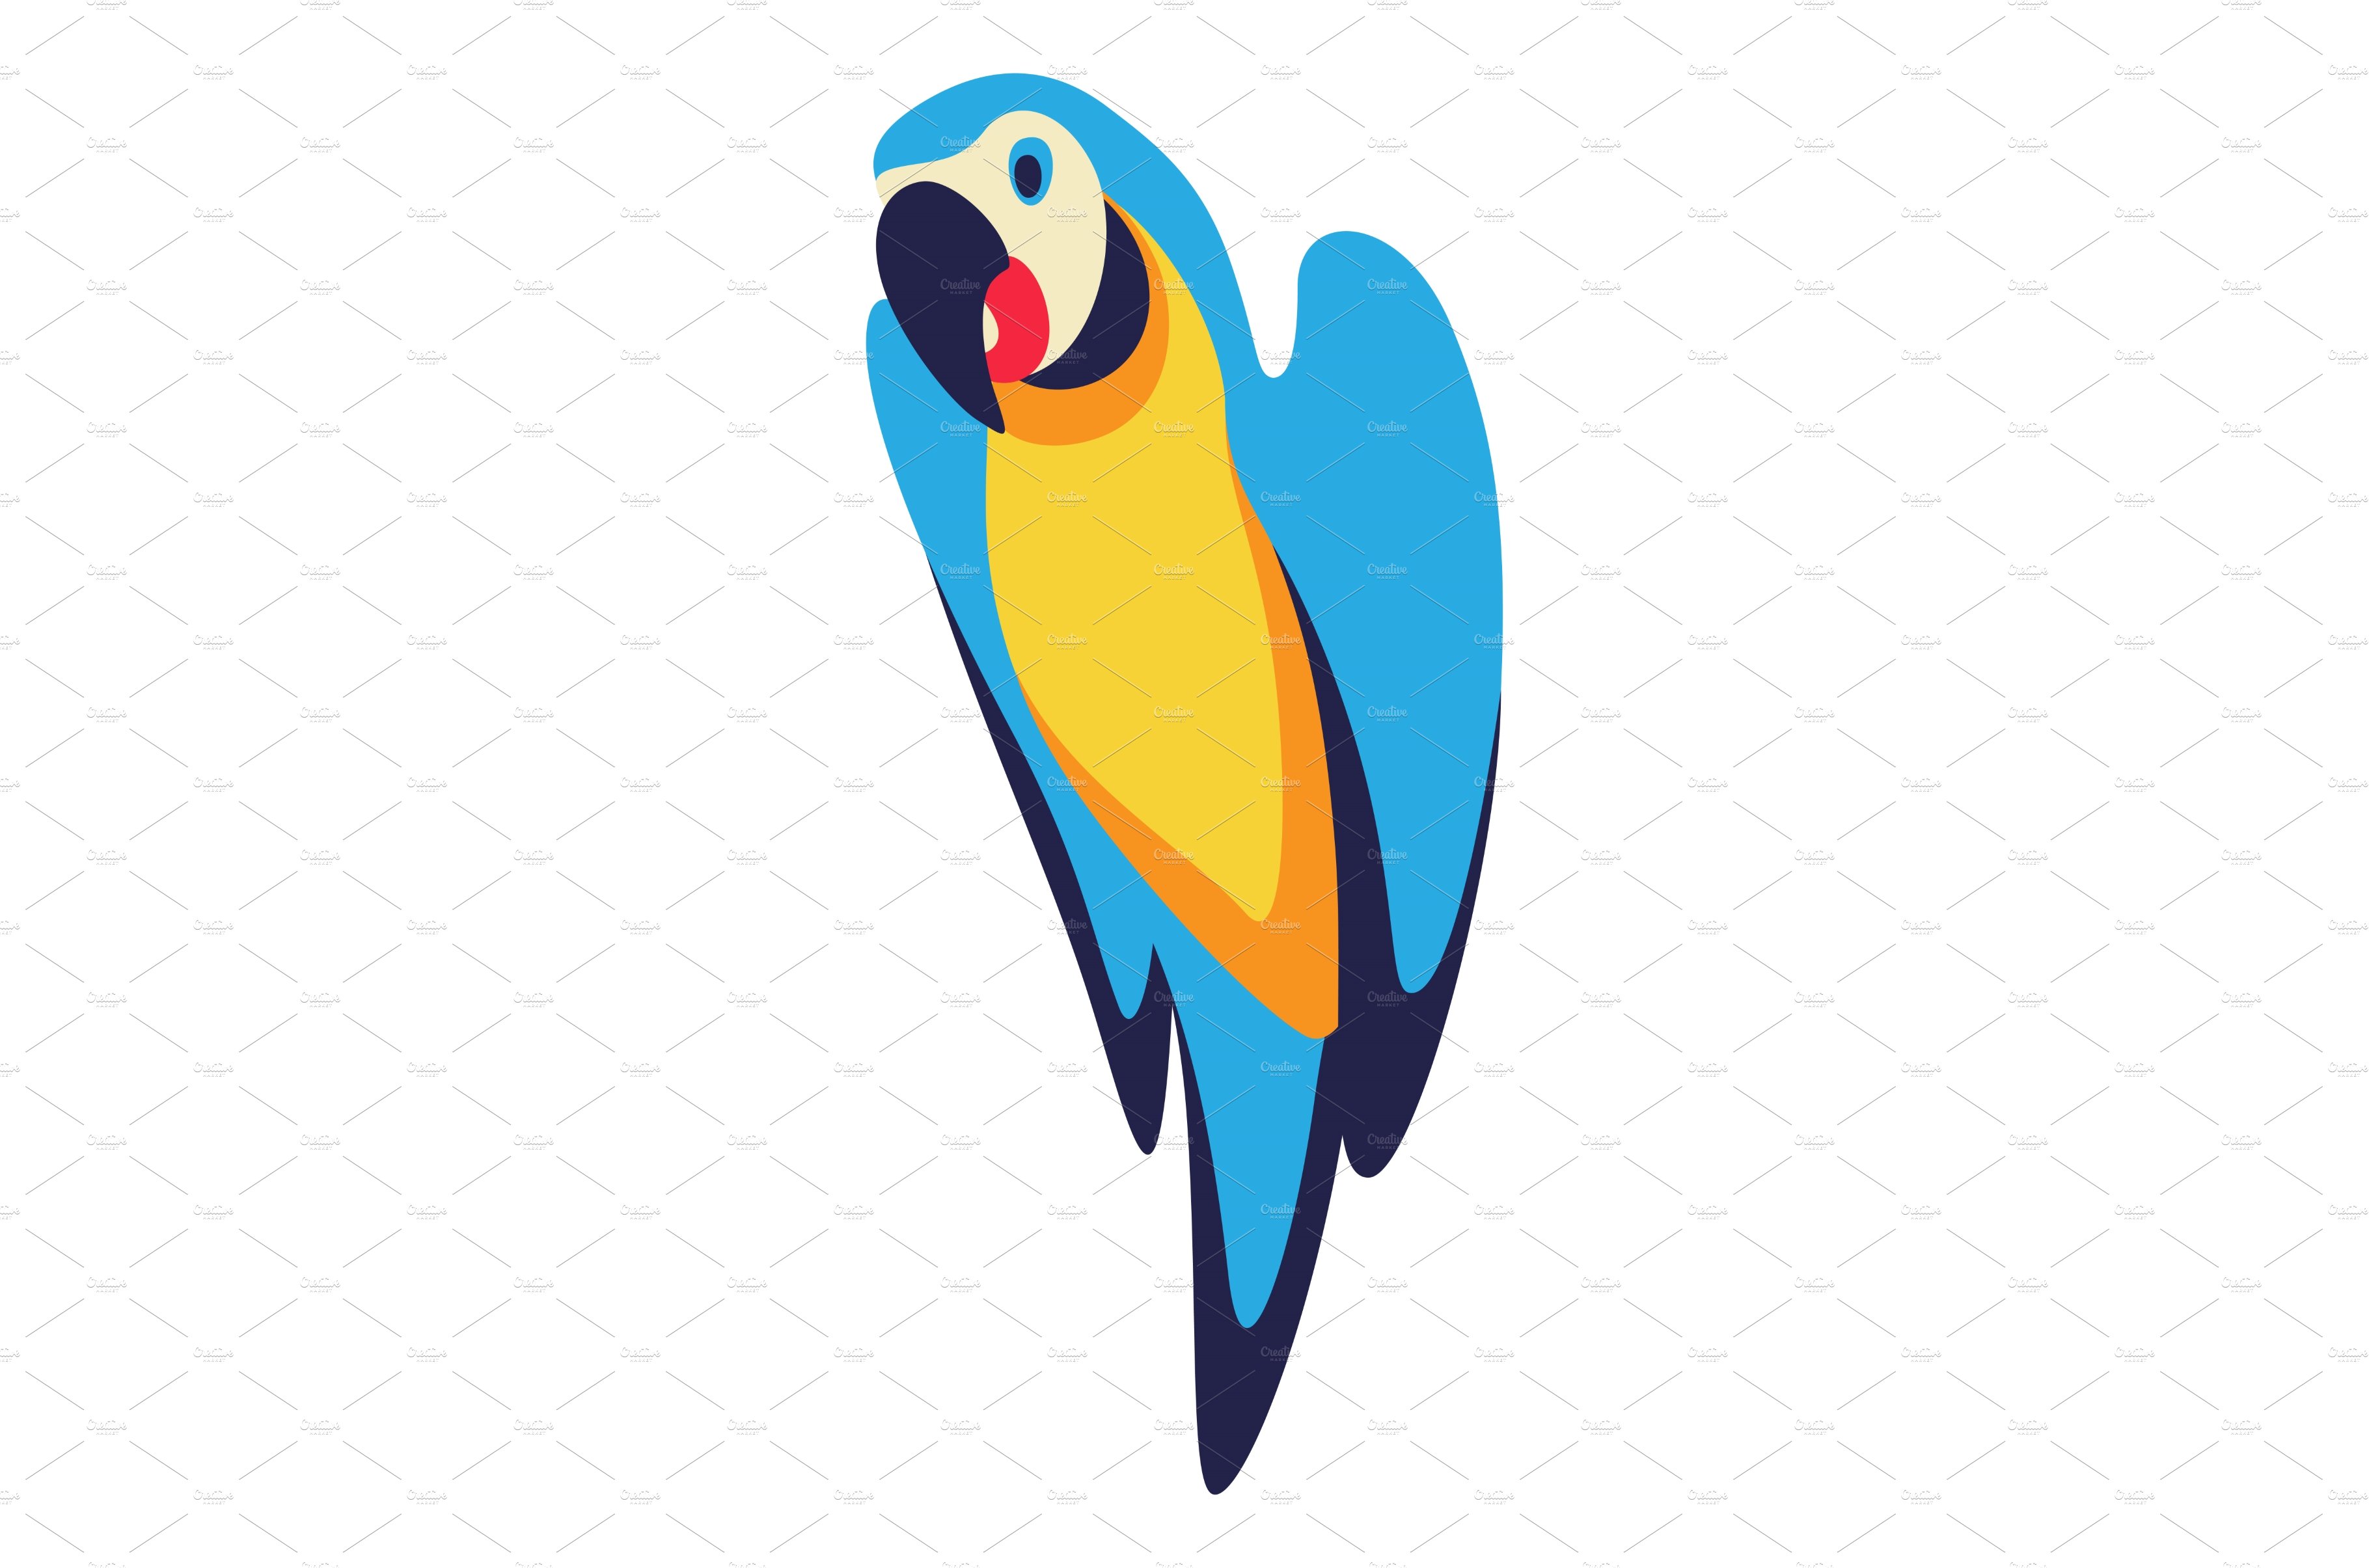 Illustration of macaw parrot cover image.